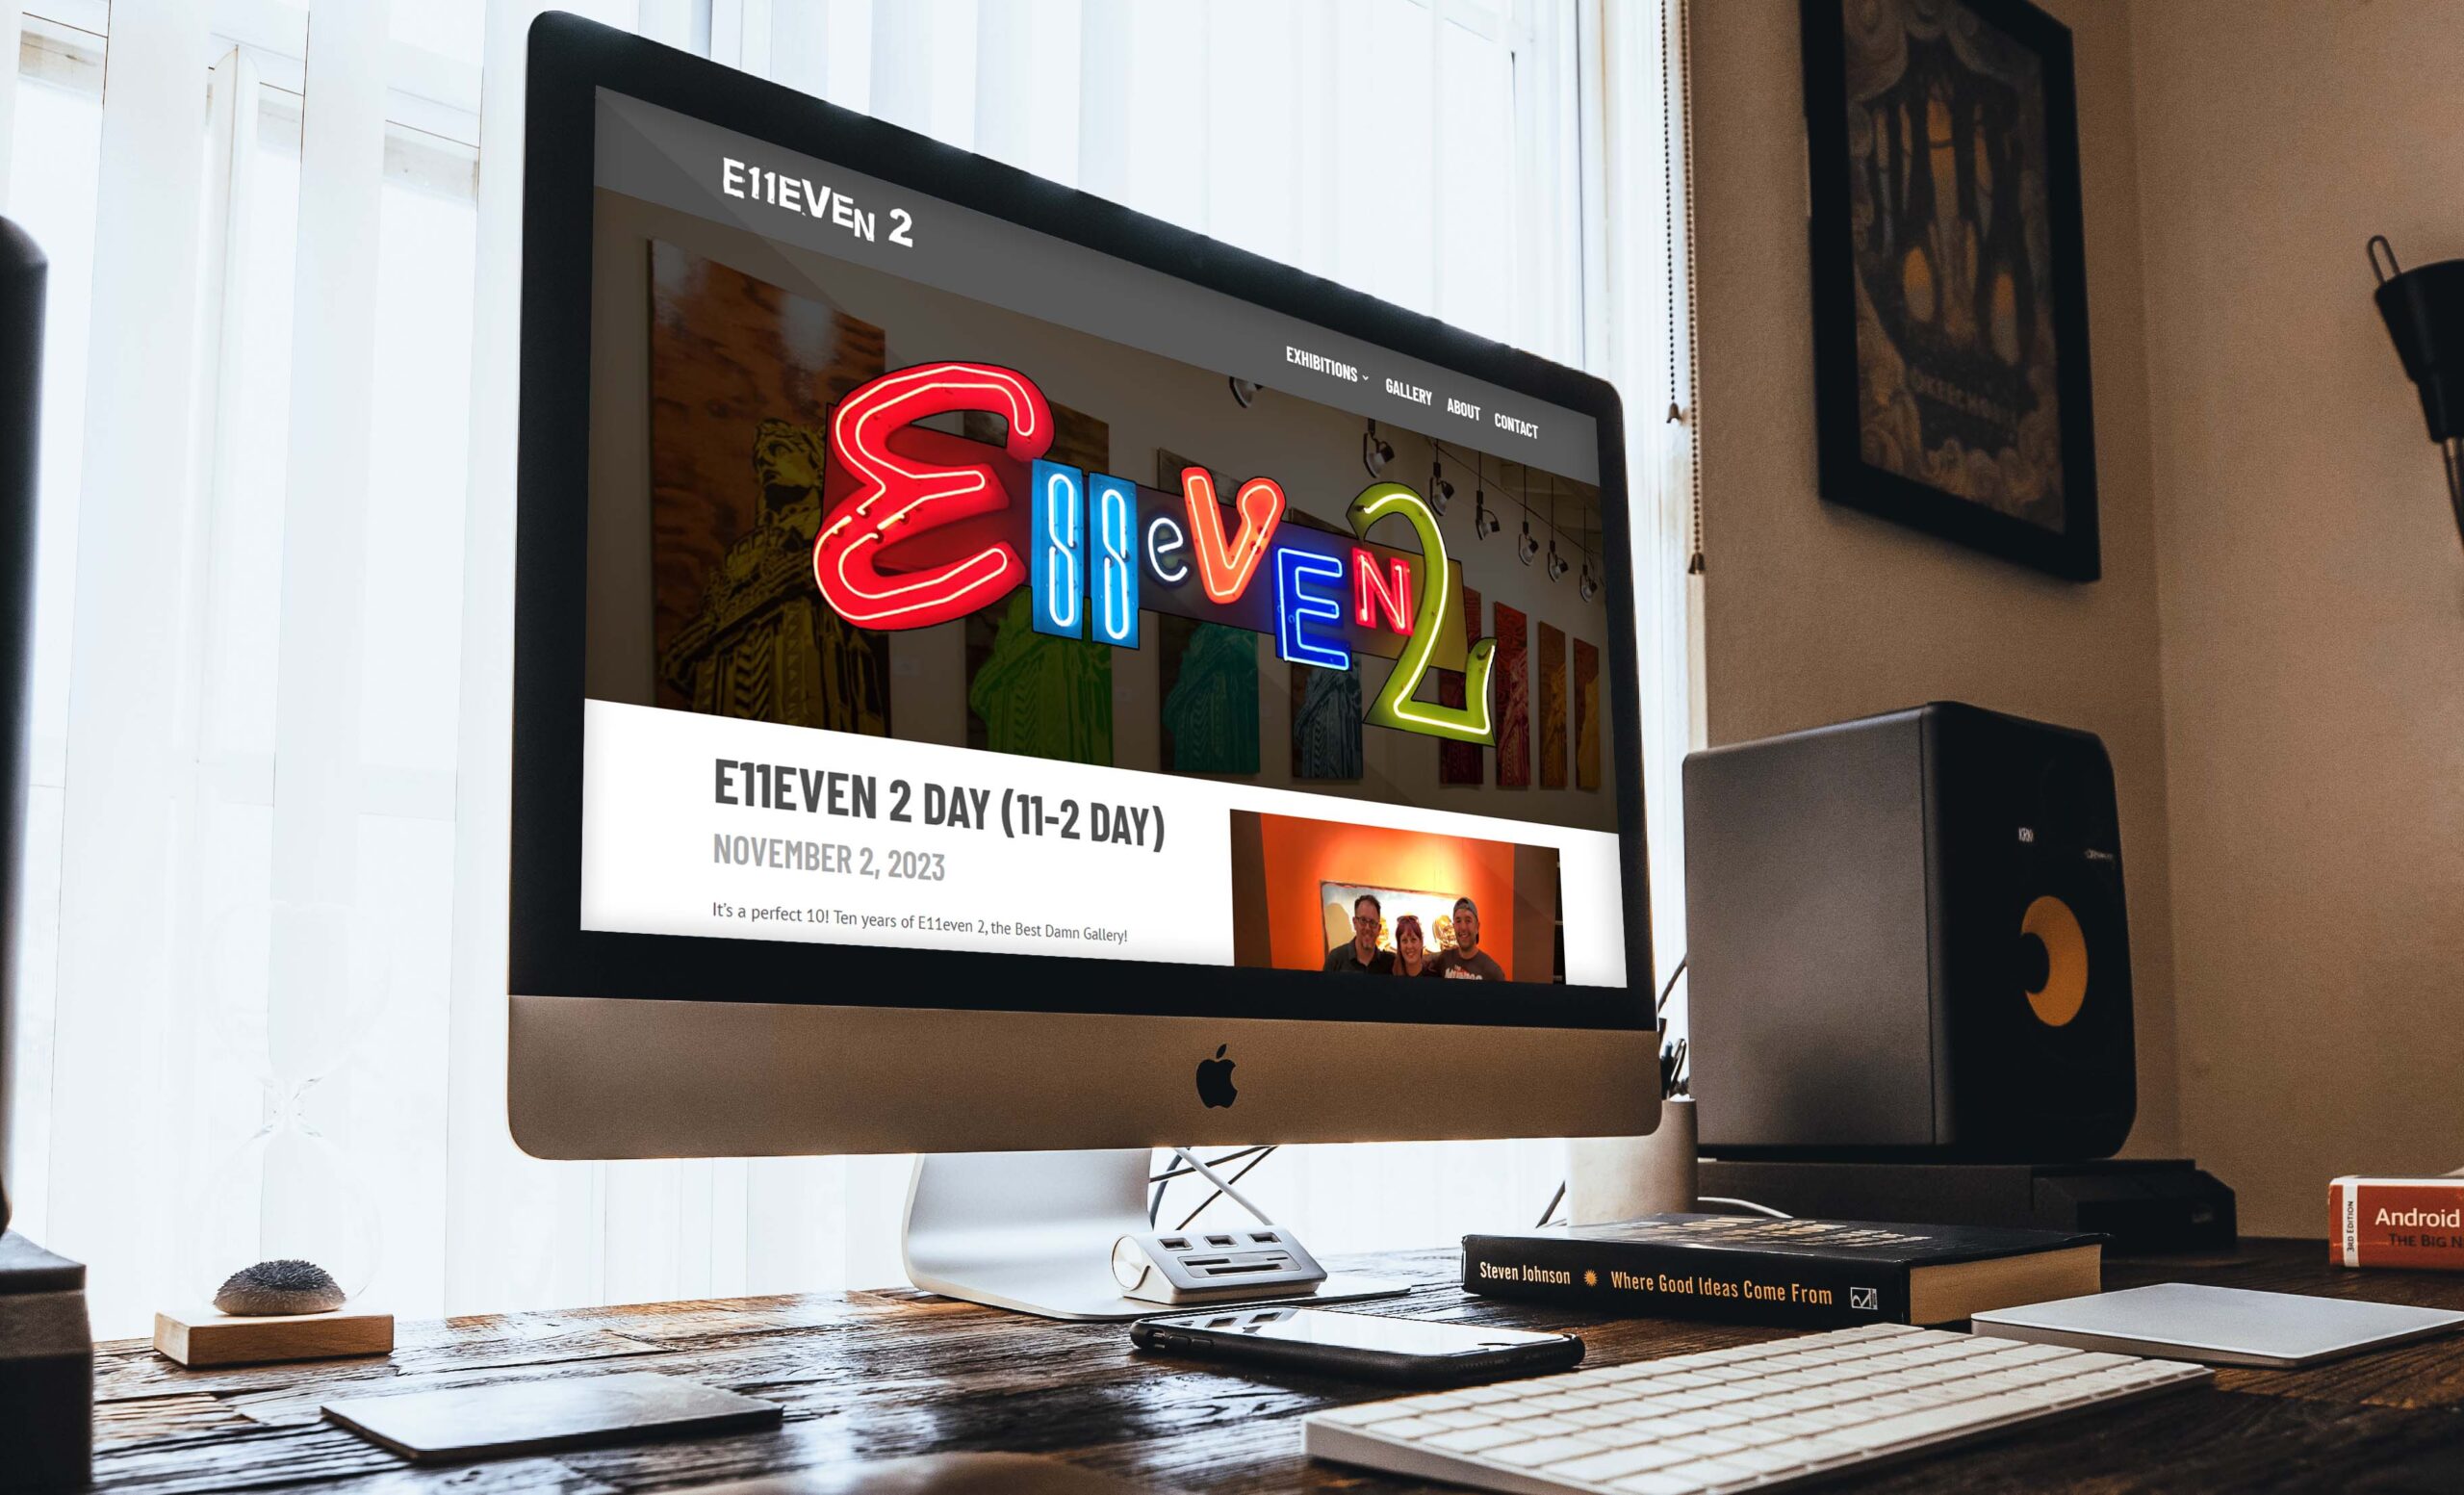 E11EVEN 2 home paged mocked up on a desktop screen.